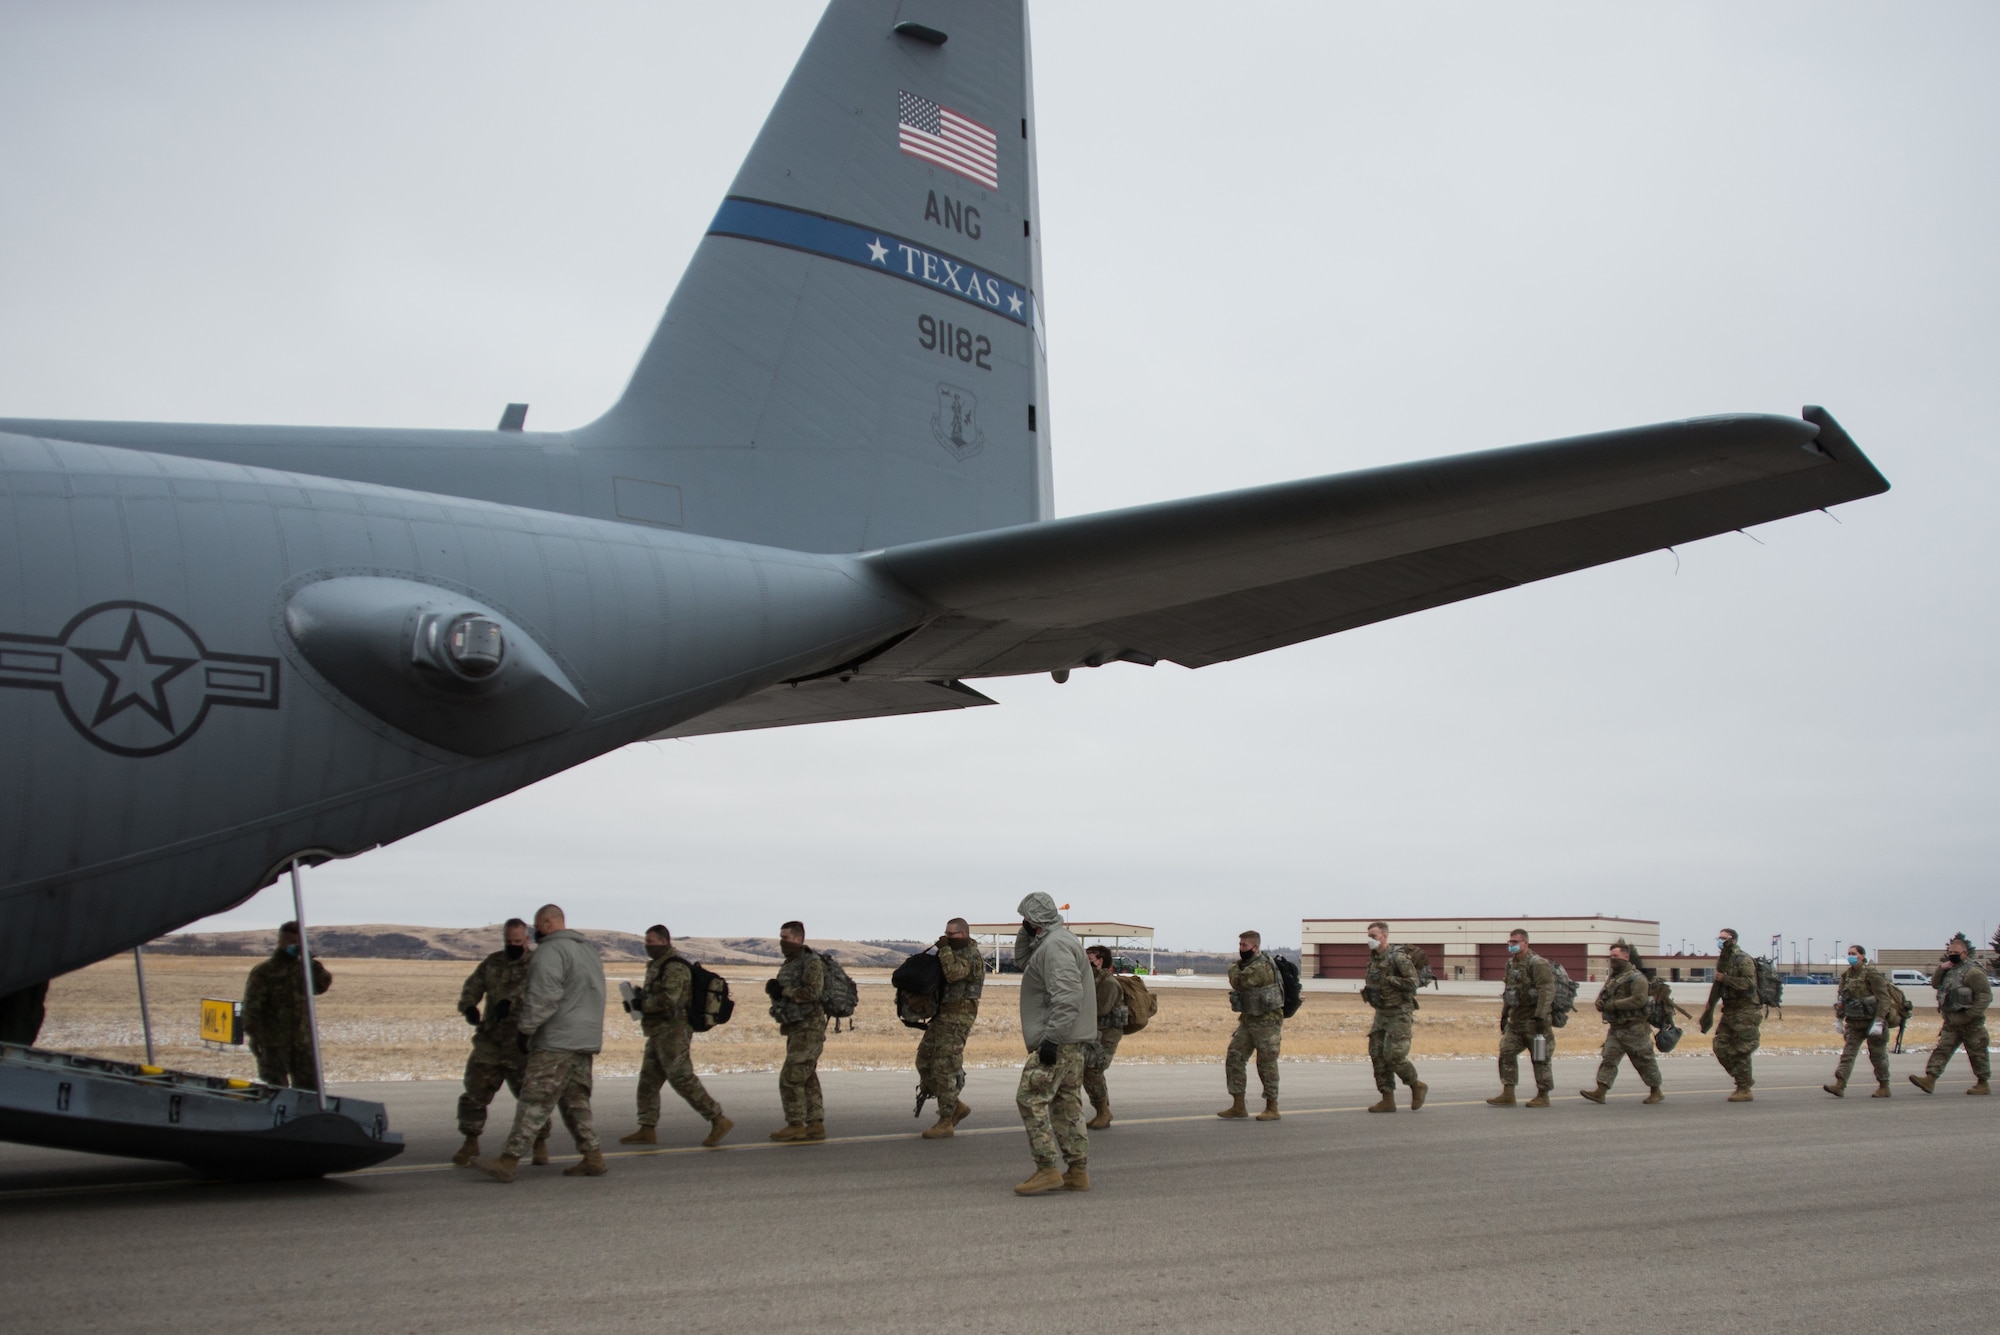 North Dakota National Guard Soldiers from the 816th Military Police Company, Bismarck N.D., file into a C-130H2 aircraft assigned to the 136th Airlift Wing out of Fort Worth, Texas, Jan. 15, 2021. The Citizen-Soldiers departed for Washington, D.C., in support of the 59th presidential inauguration.